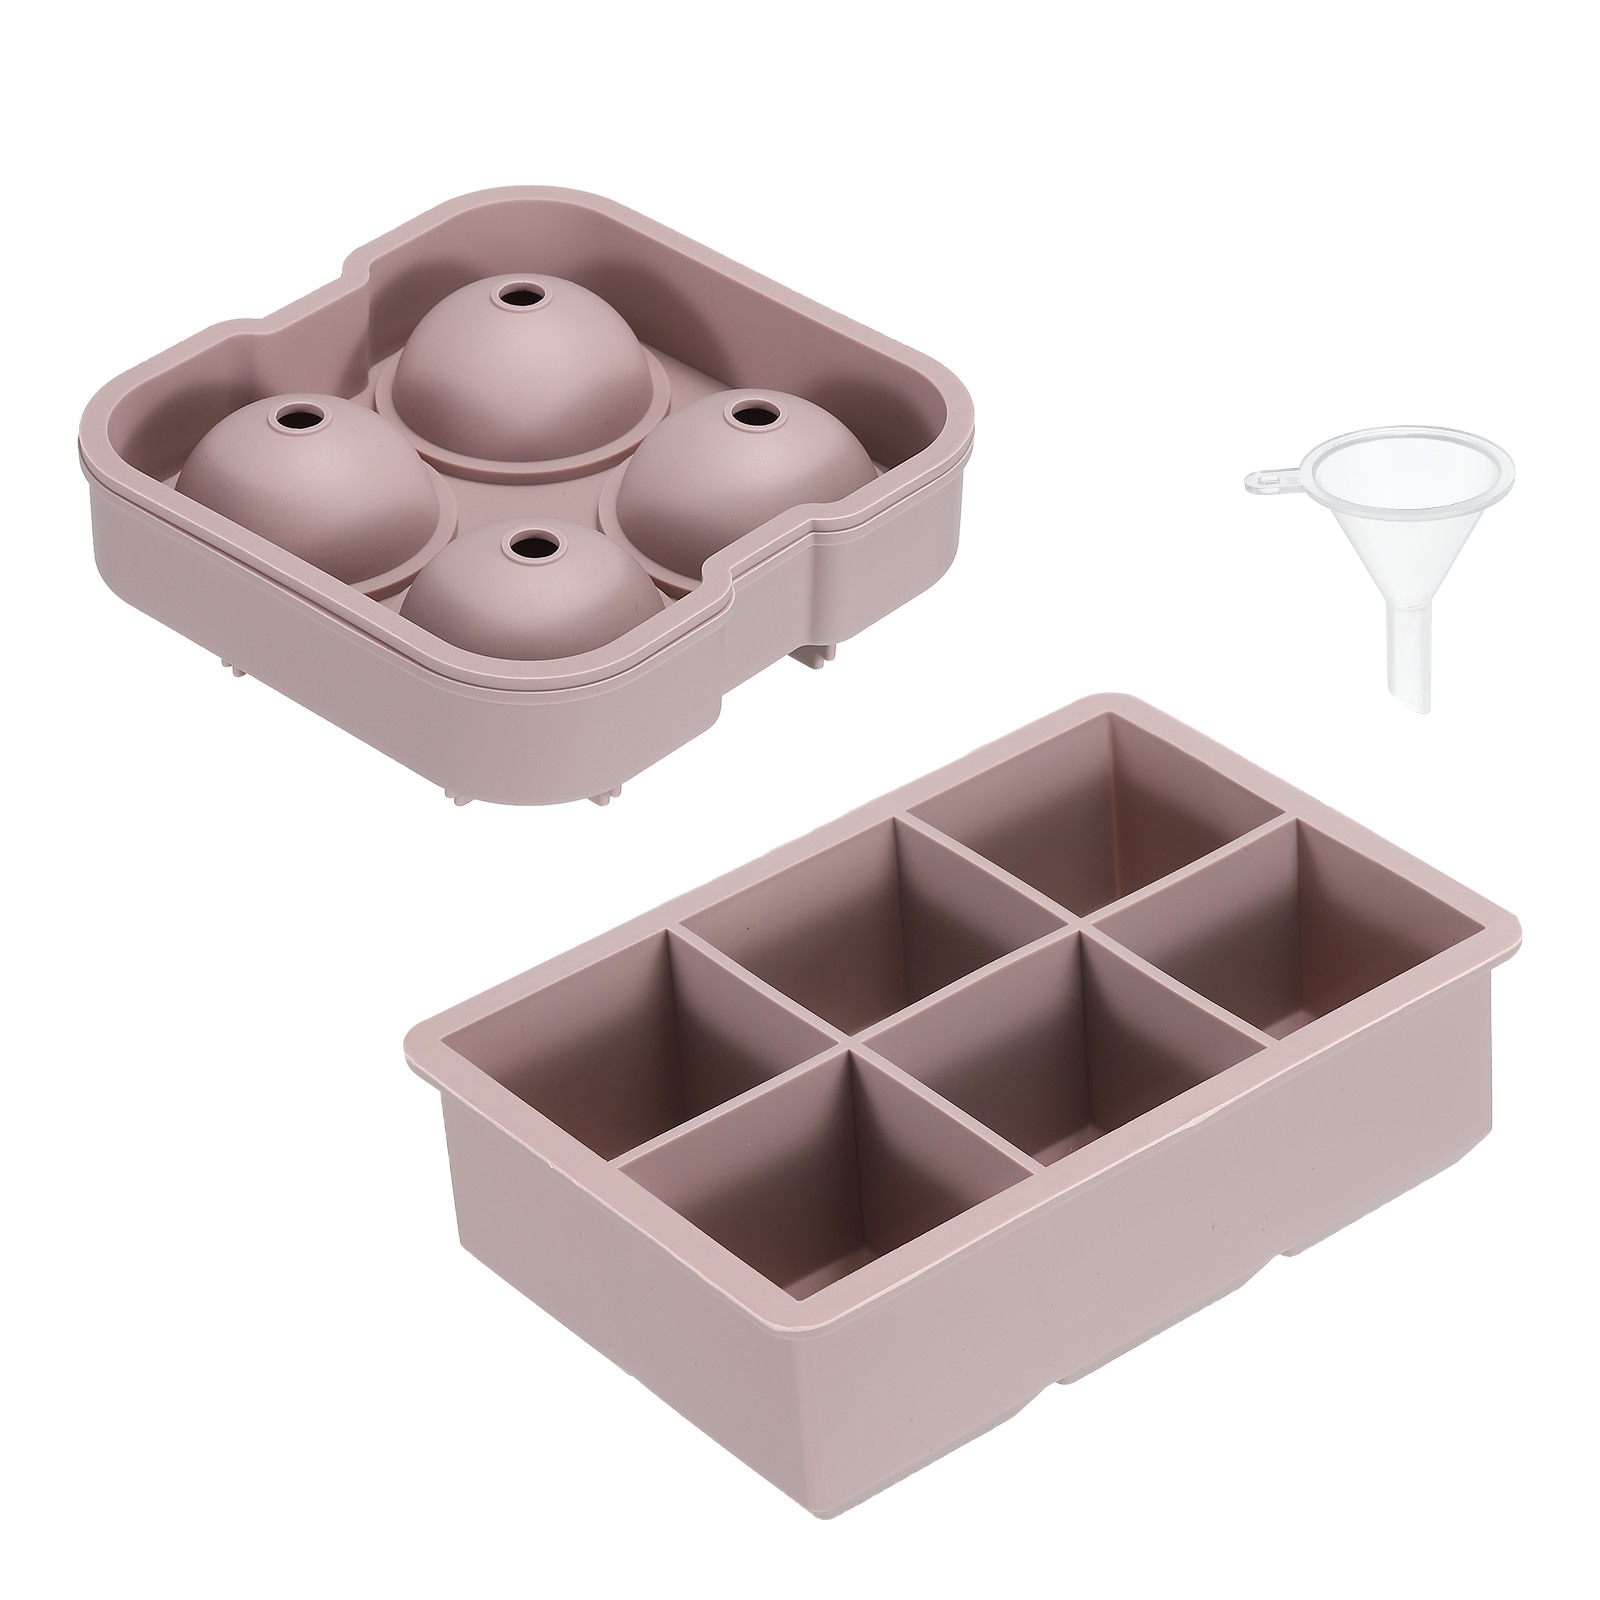 https://ak1.ostkcdn.com/images/products/is/images/direct/ee2c2f69a3b7df53ca4af37d20c51f8c88d3b677/Pink-4-Grid-Sphere-Ice-Ball-Maker-%26-6-Grid-Square-Ice-Cube-Maker-with-Lid.jpg